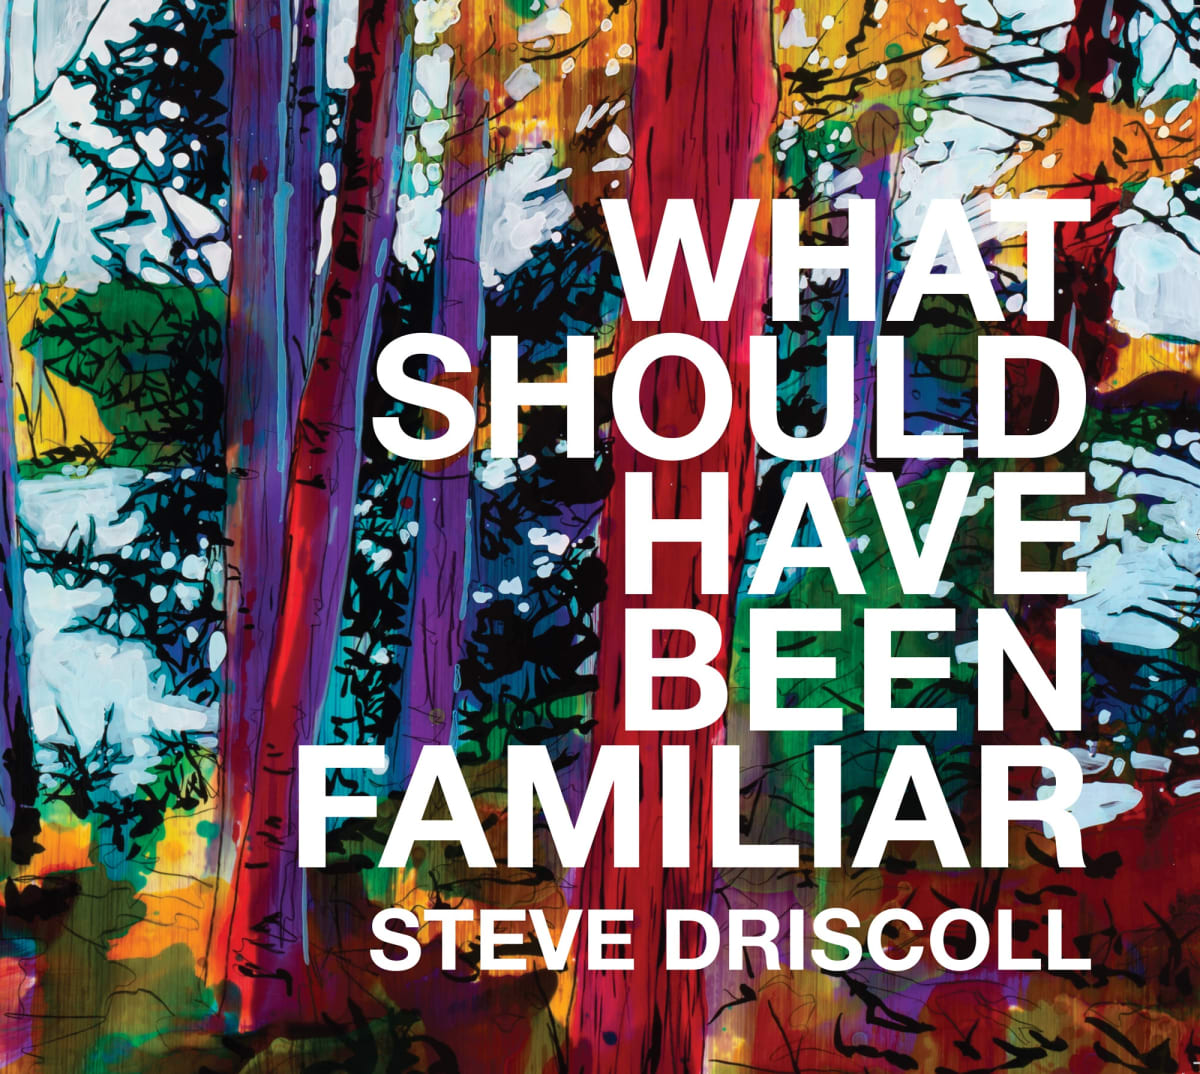 Steve Driscoll: What should have been familiar